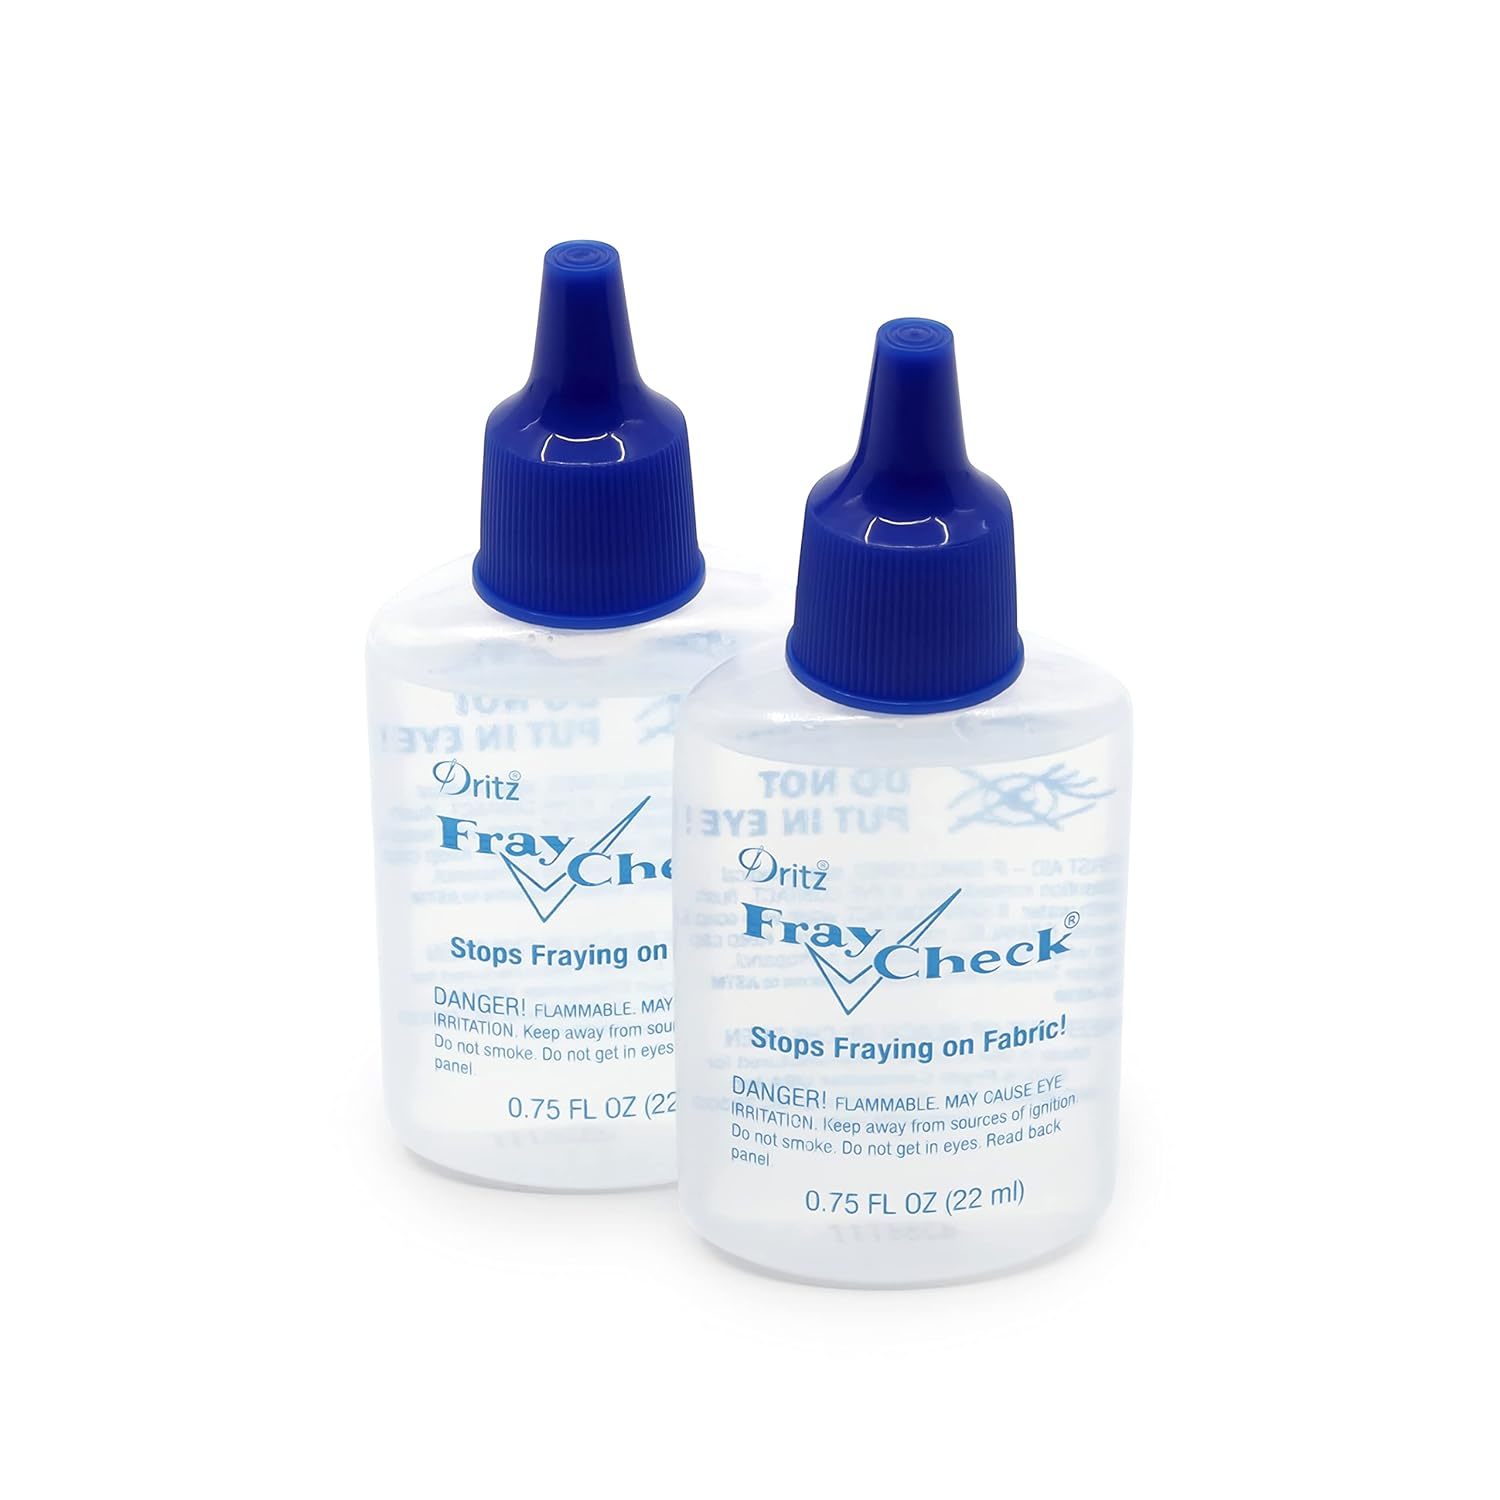 Primary image for Dritz Fray Check Liquid, 0.75-Fluid Ounce, 2 Count